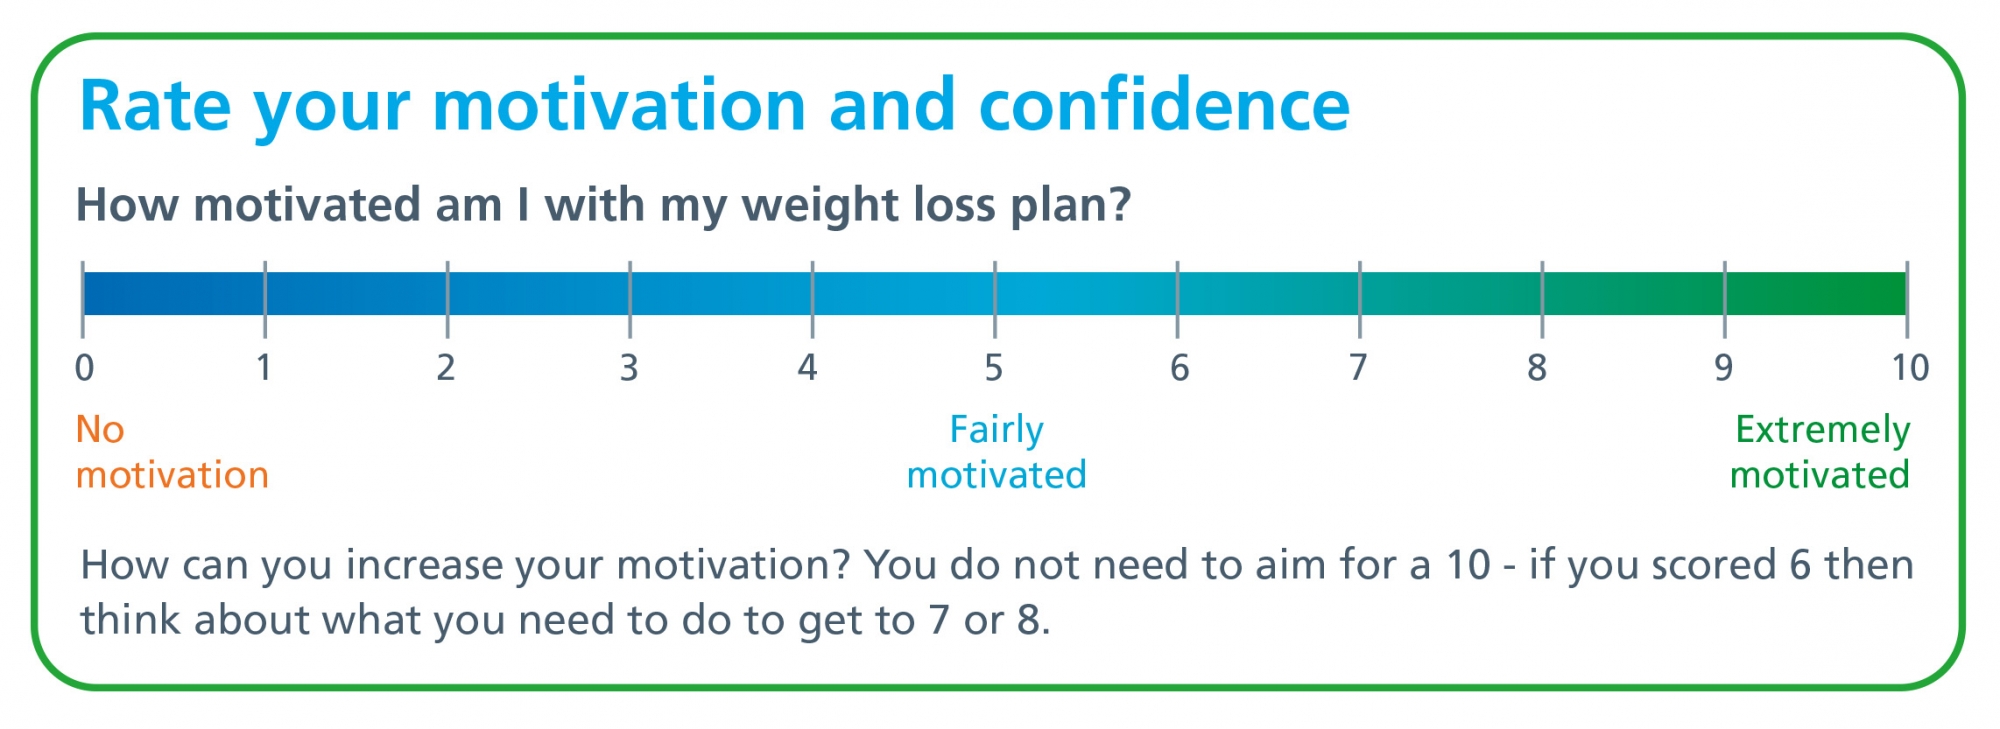 A scale to rate your confidence and motivation from 0 No motivation to 5 Fairly Motivated to 10 Extremely motivated. How can you increase your motivation? You do not need to aim for a 10 - if you scored 6 then think about what you need to do to get to 7 o